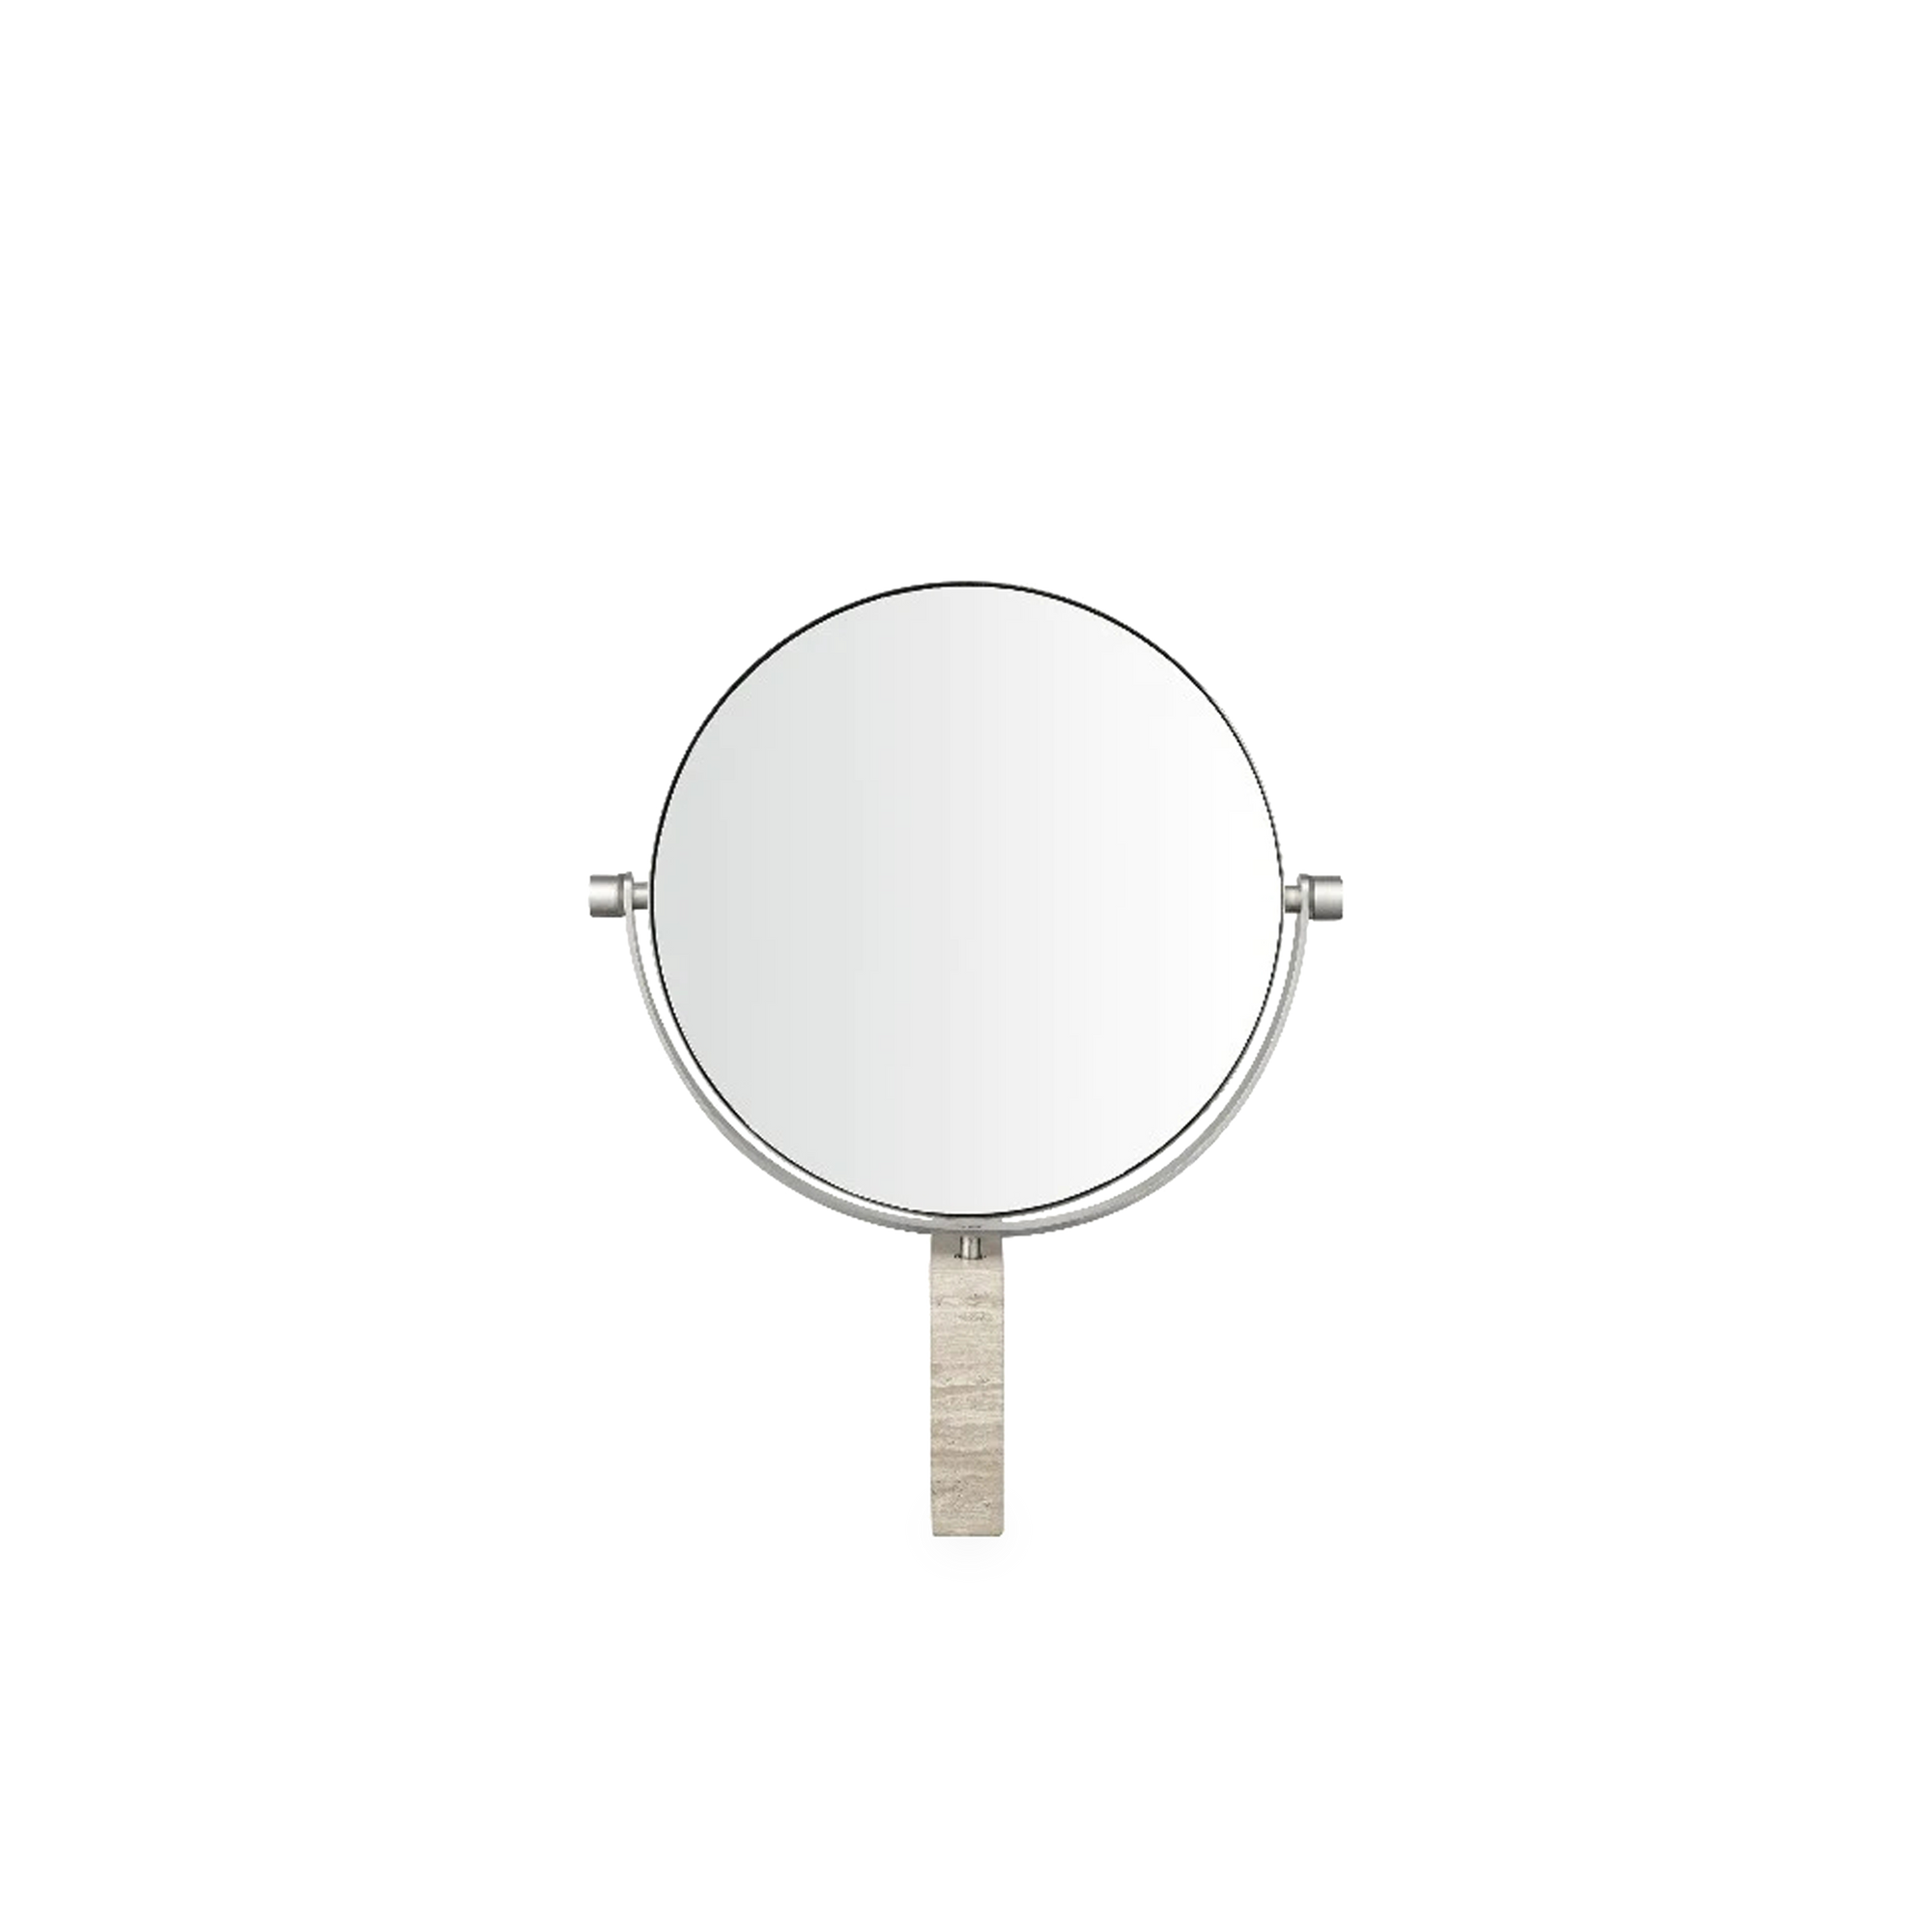 Marble Vanity Wall Mirror is designed to be beautiful with a practical purpose.